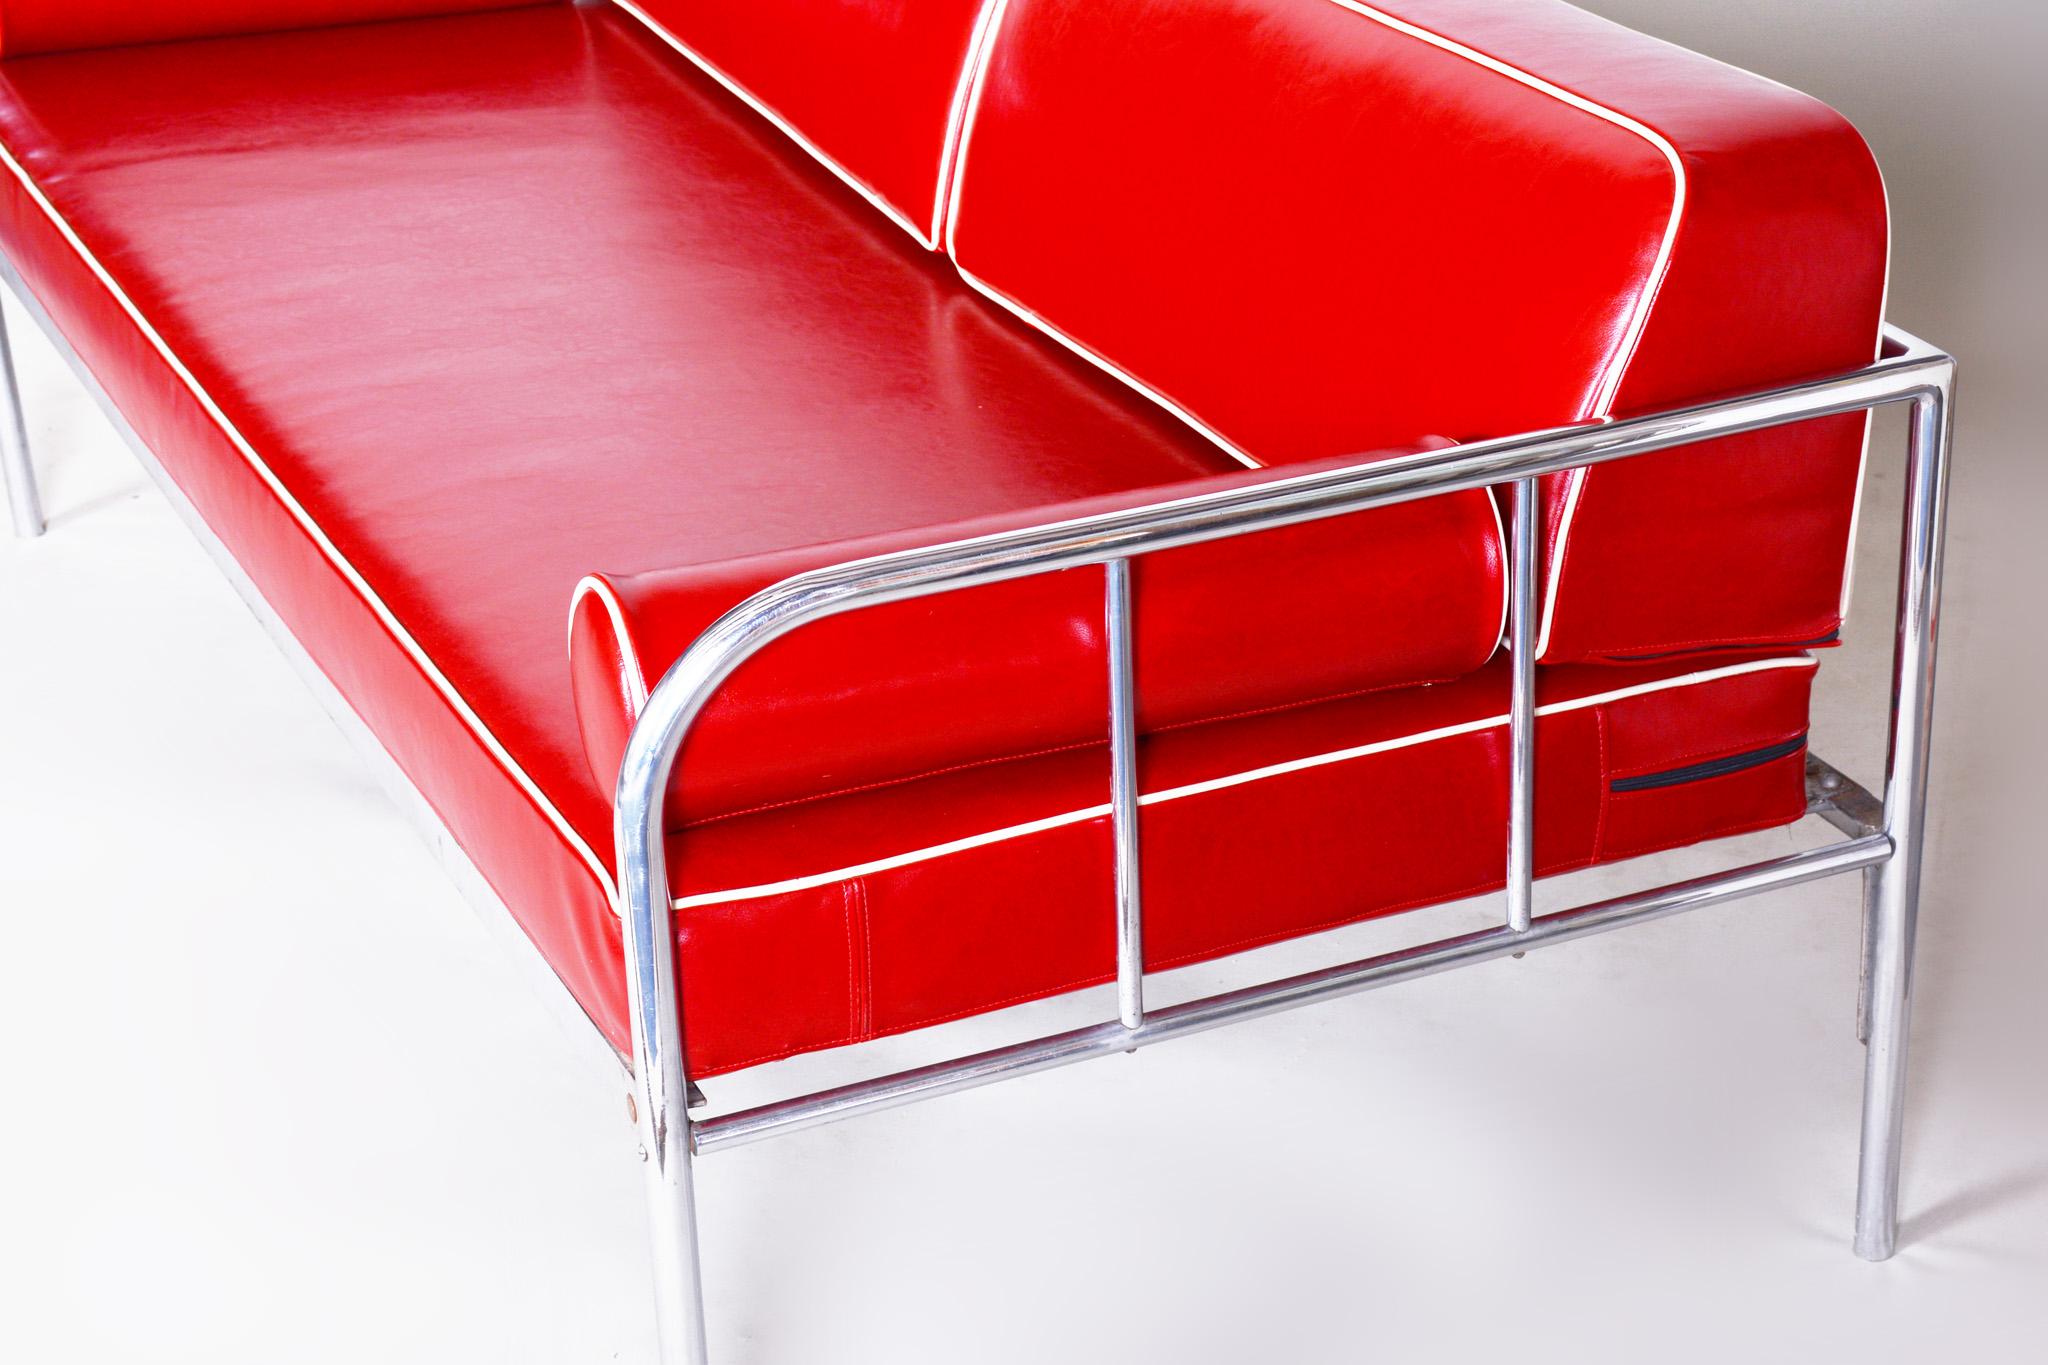 Fully Restored Bauhaus Leather and Chrome Sofa by Vichr a Spol, 1930s Czechia For Sale 1